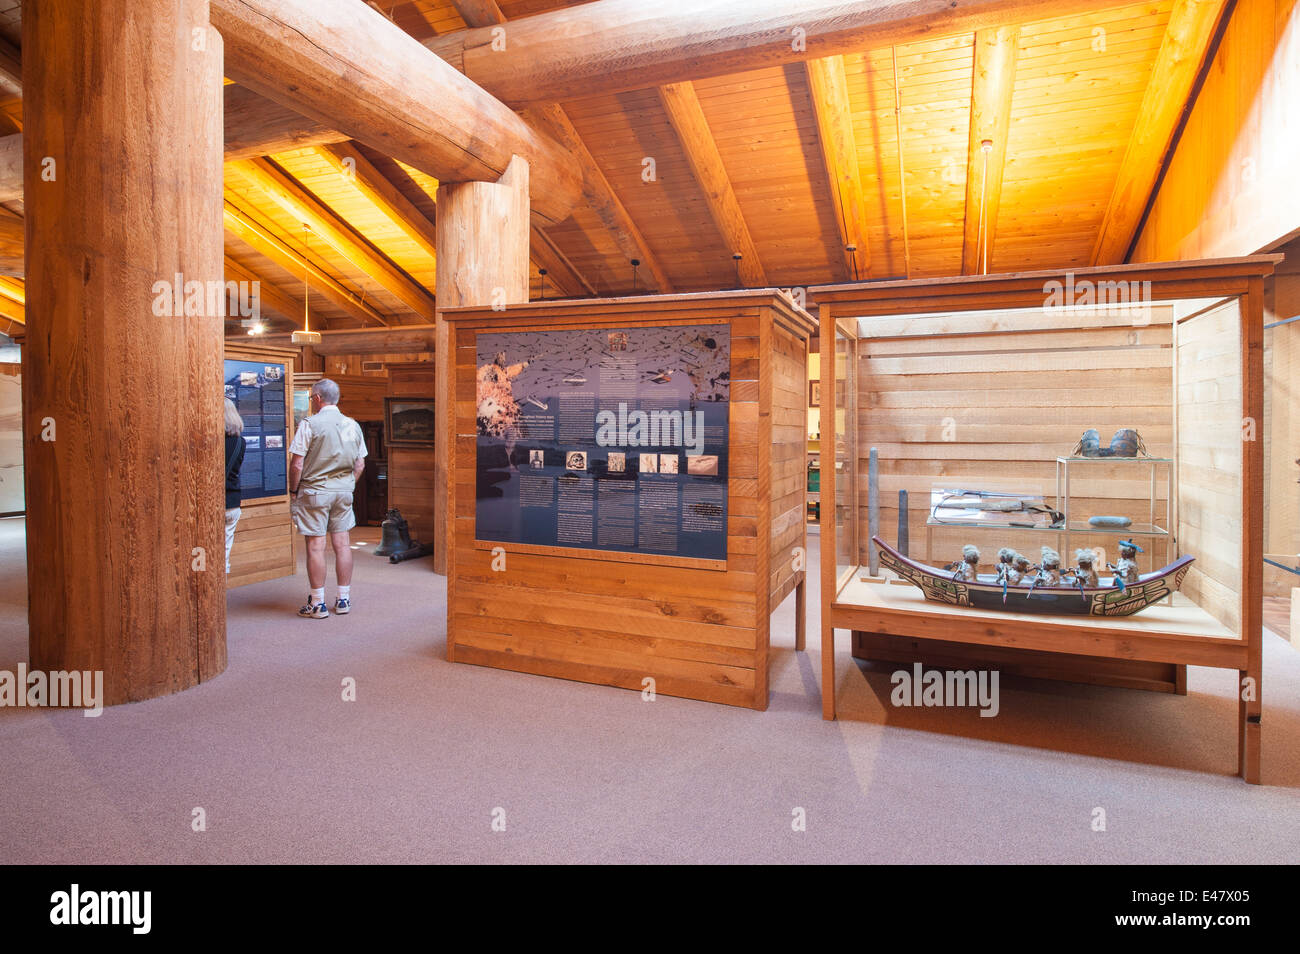 Visitors viewing First nation indian haida coastal people exhibits Museum of Northern British Columbia, Prince Rupert, Canada. Stock Photo